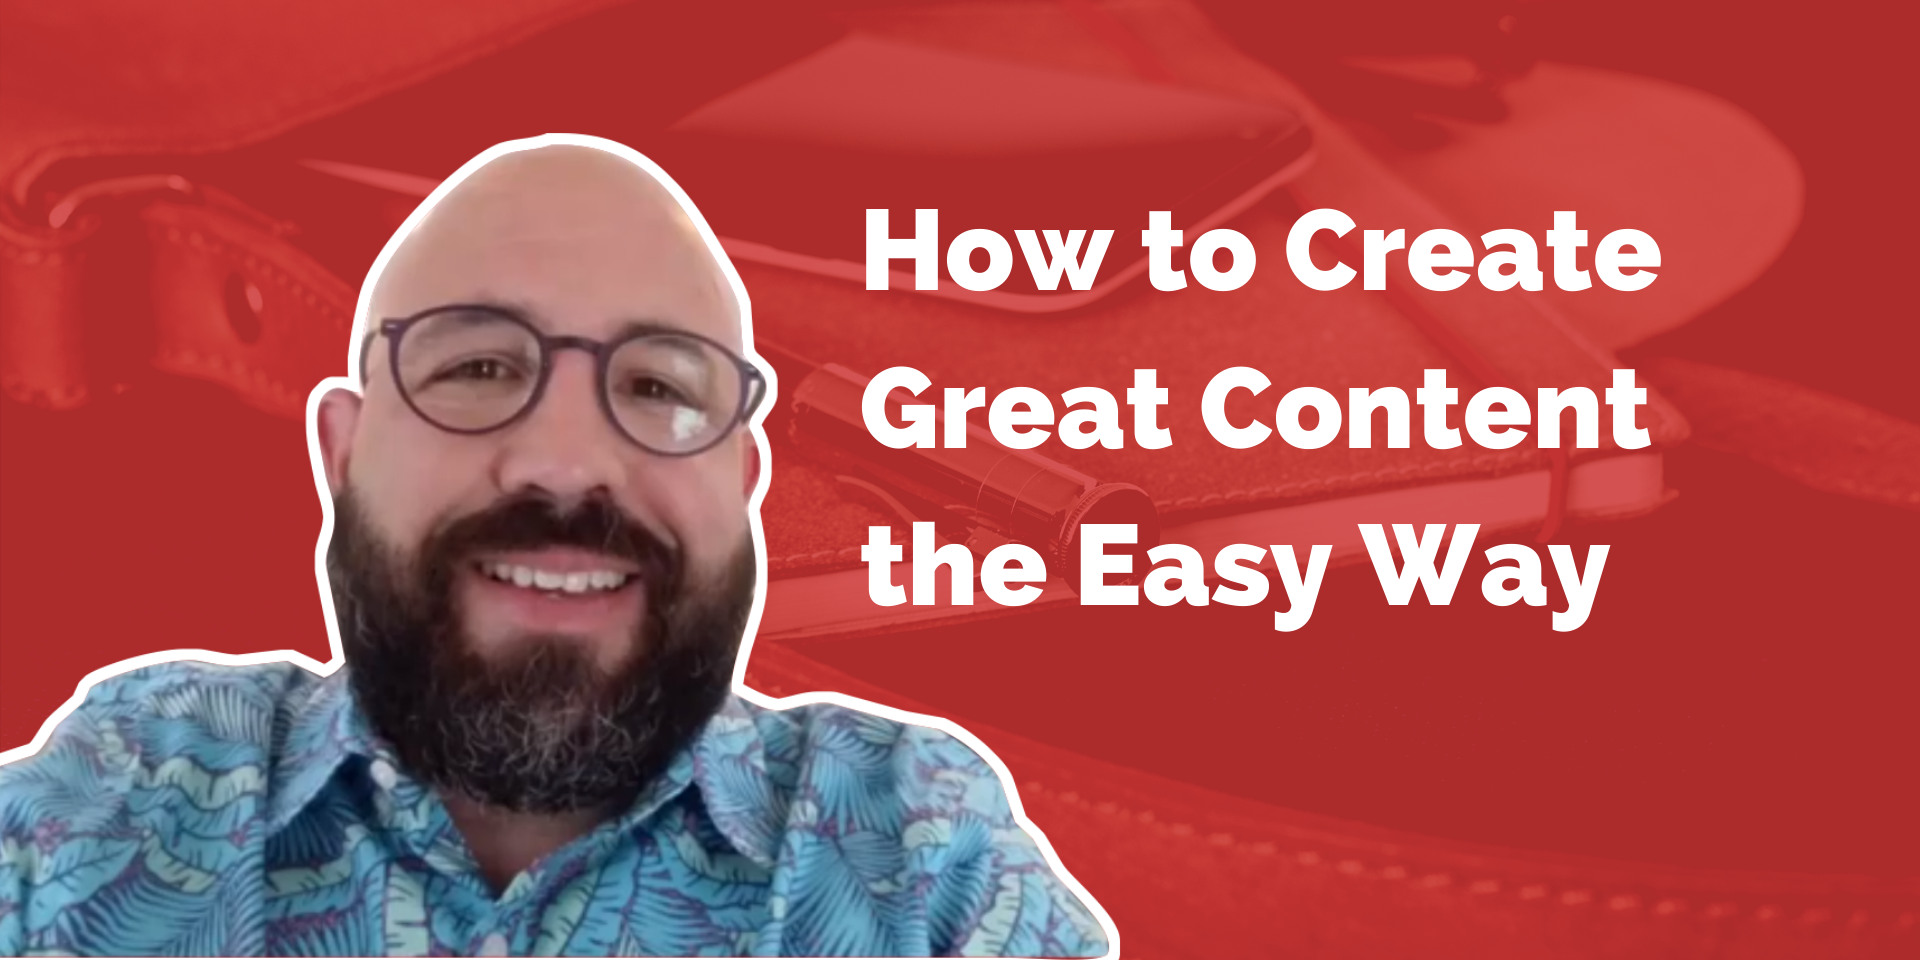 How to create great content, the easy way.